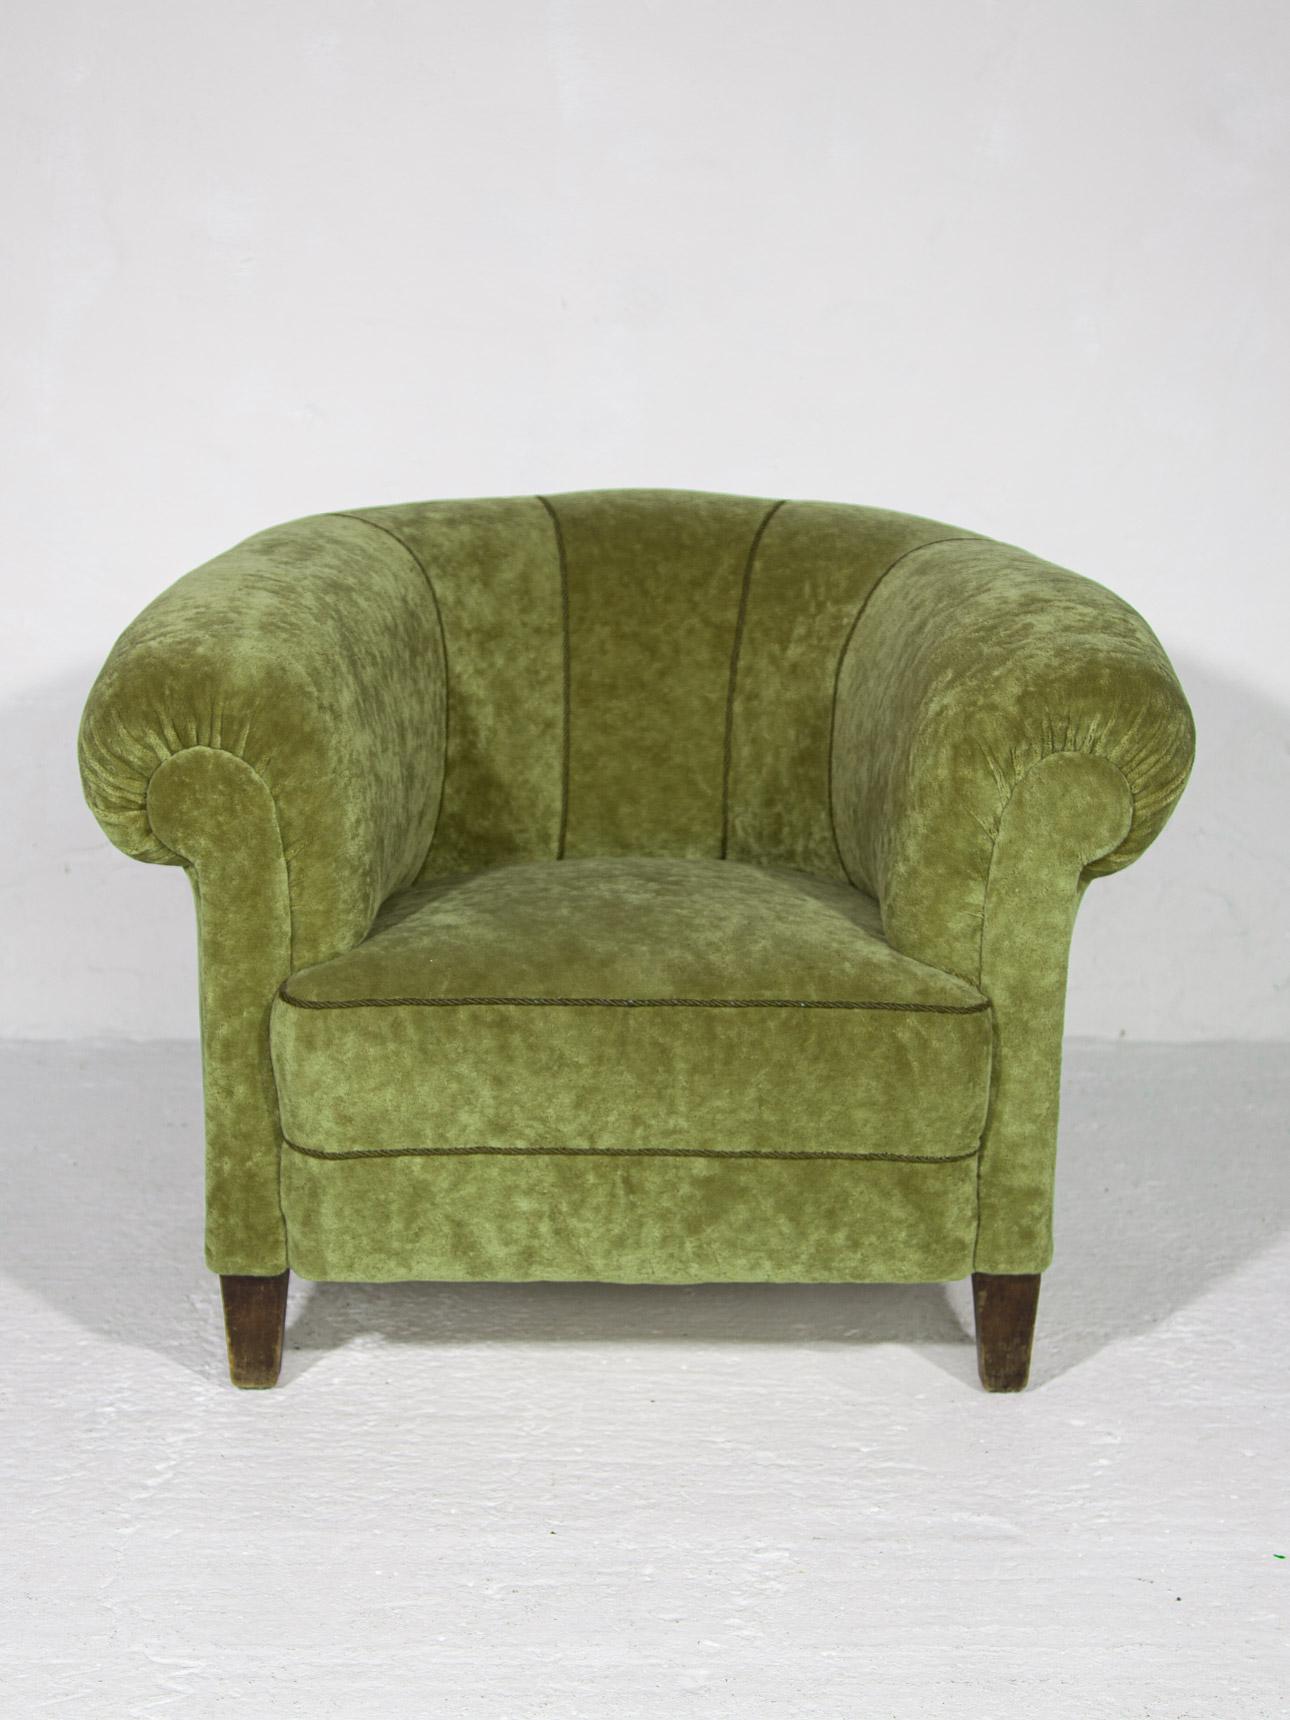 The soft and sensuous green olive velvet upholstery is in absolutely outstanding original condition. Rippled waterfall style pleated tailoring is punctuated by the spherical art deco accents on the arms. One does not have to compromise comfort for